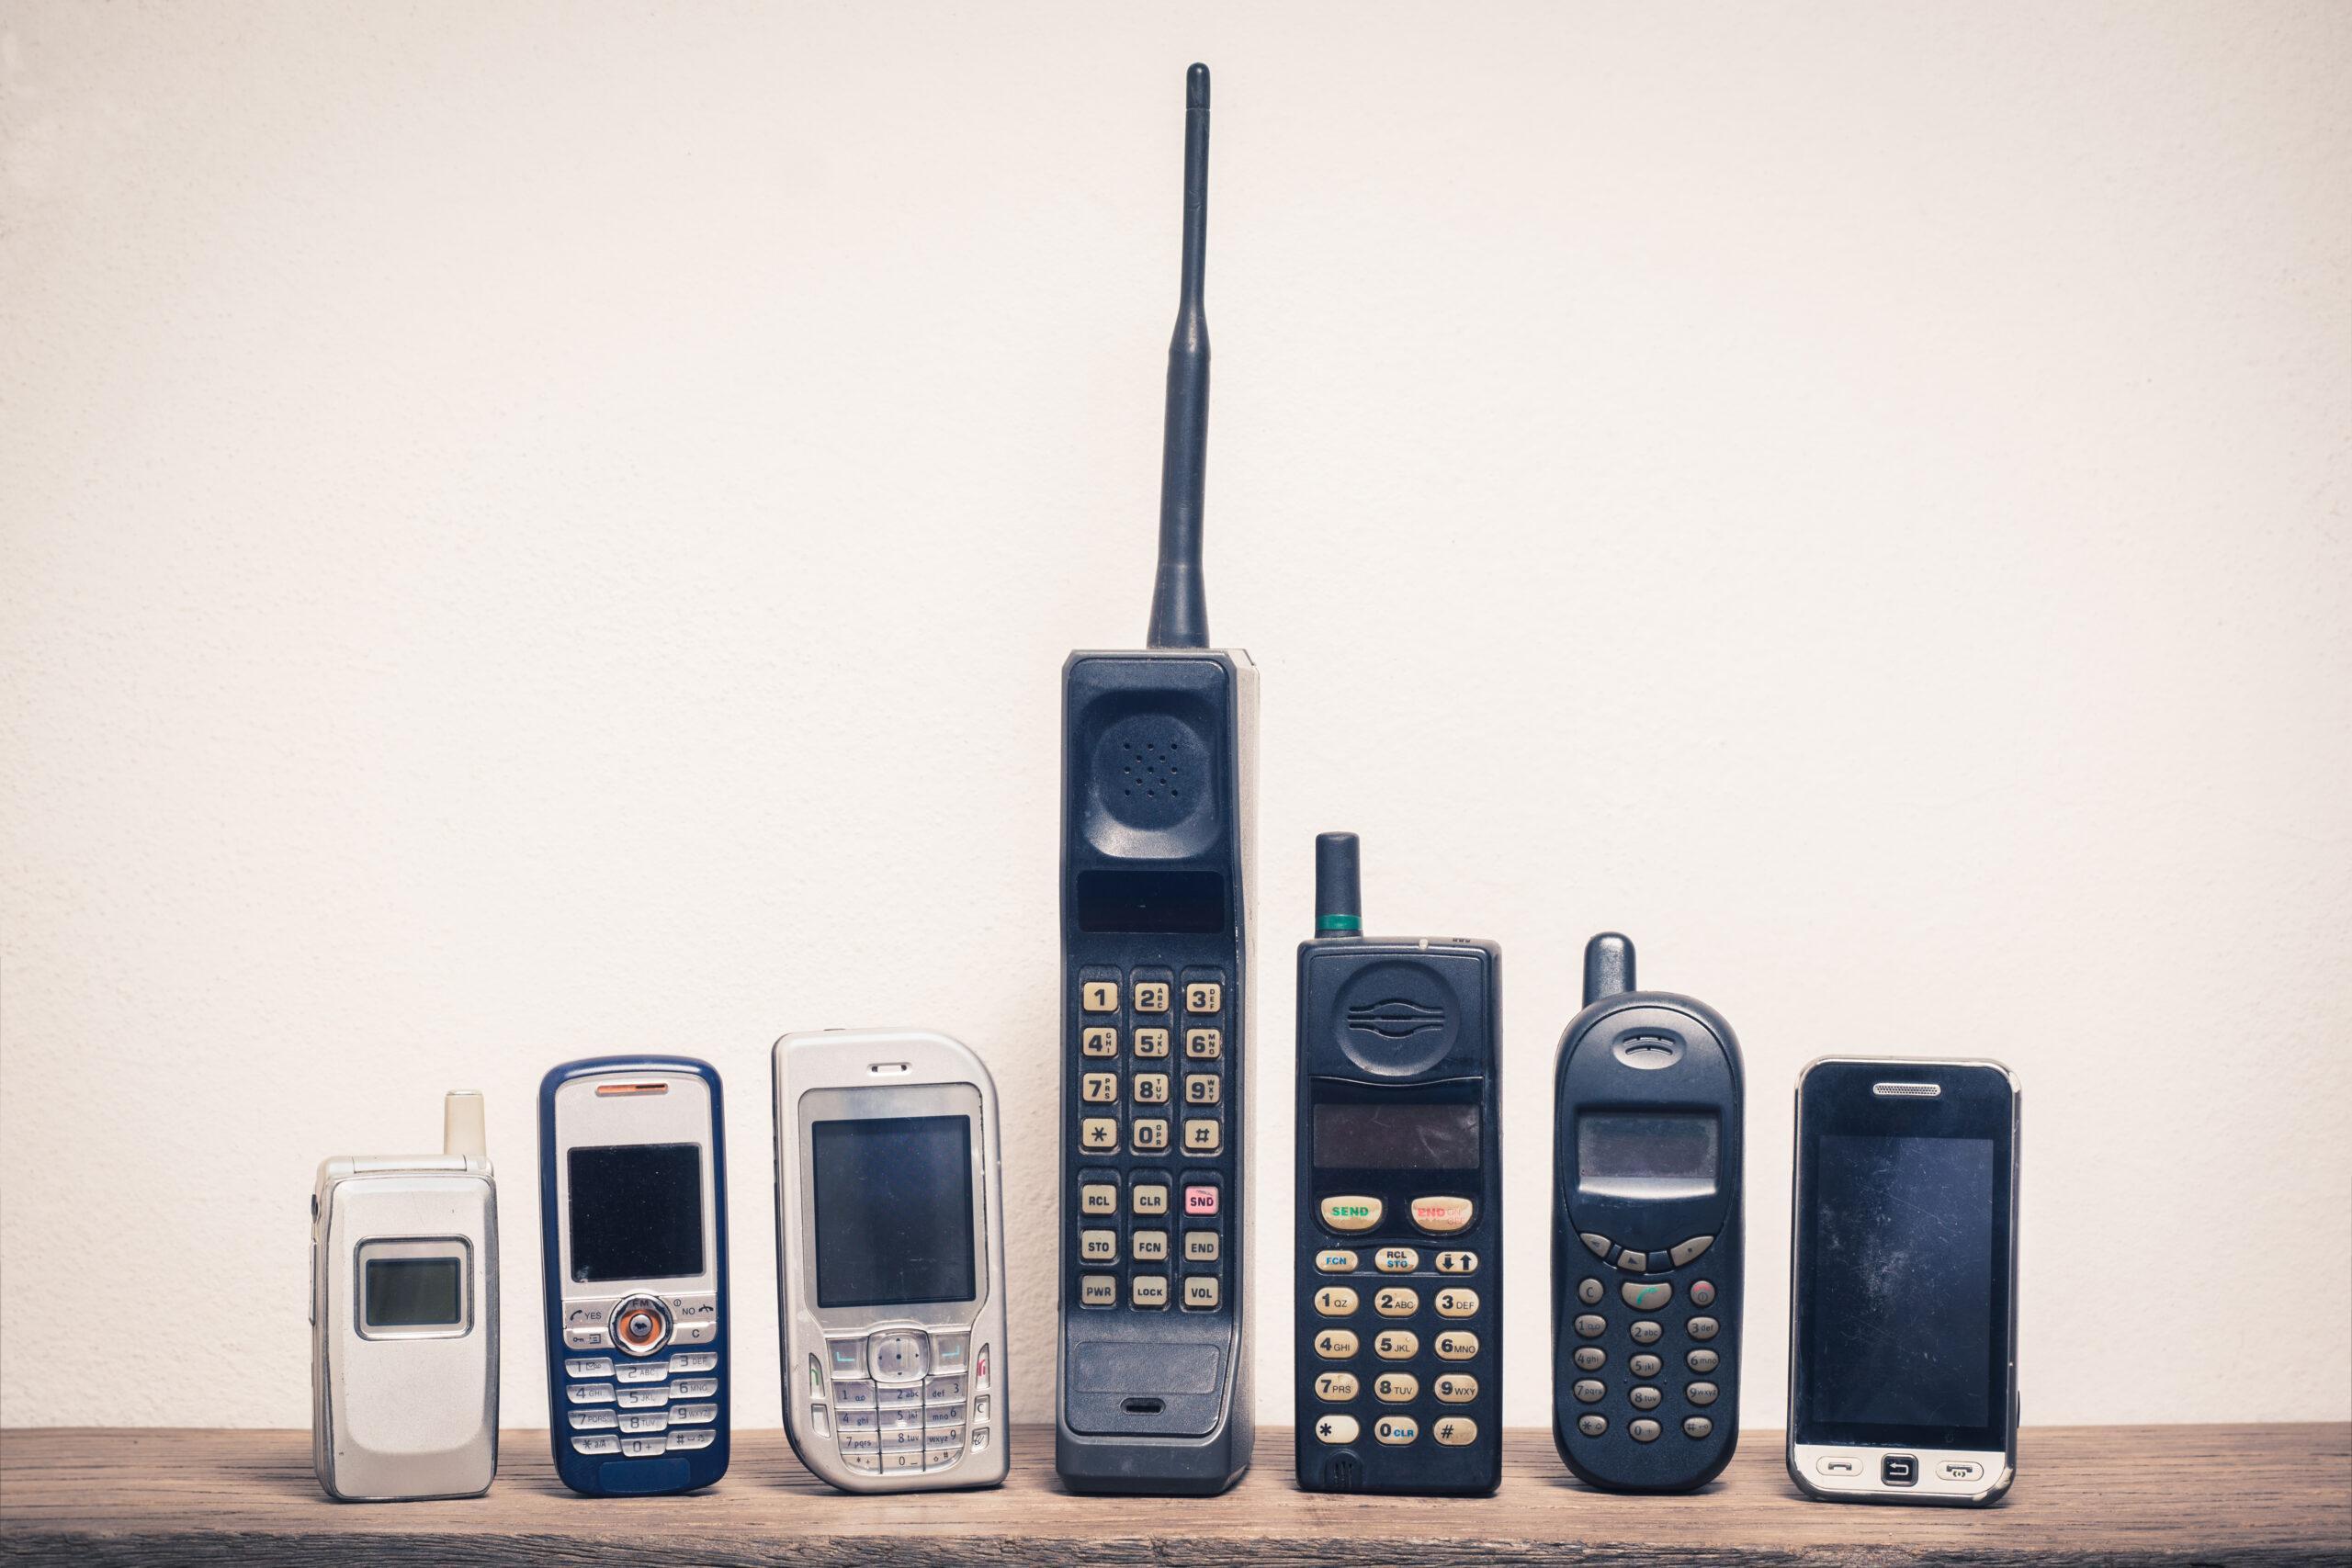 Group of old and obsolete mobile phone or cell phone on old wood